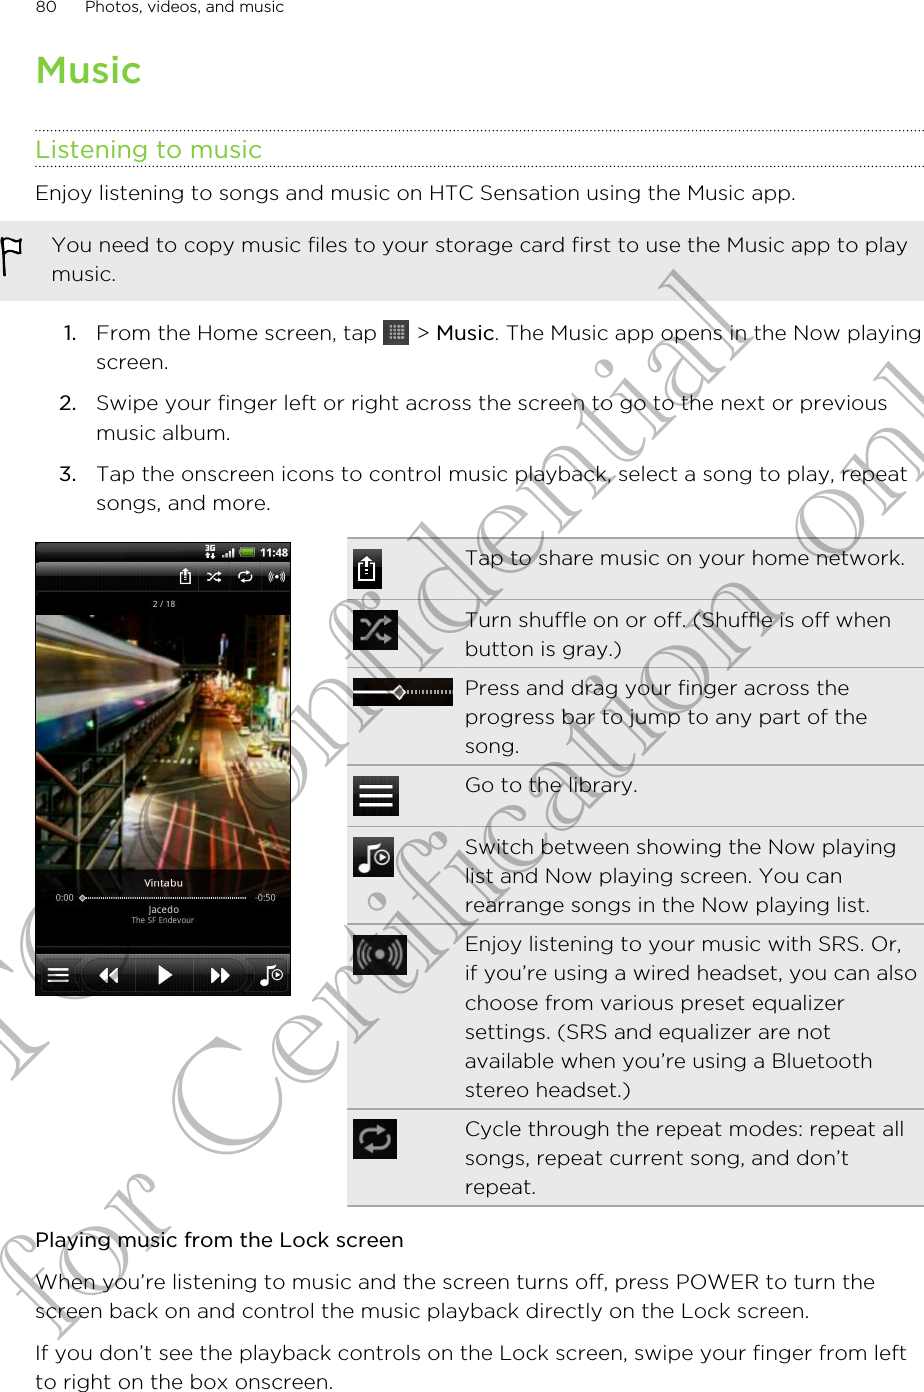 MusicListening to musicEnjoy listening to songs and music on HTC Sensation using the Music app.You need to copy music files to your storage card first to use the Music app to playmusic.1. From the Home screen, tap   &gt; Music. The Music app opens in the Now playingscreen.2. Swipe your finger left or right across the screen to go to the next or previousmusic album.3. Tap the onscreen icons to control music playback, select a song to play, repeatsongs, and more.Tap to share music on your home network.Turn shuffle on or off. (Shuffle is off whenbutton is gray.)Press and drag your finger across theprogress bar to jump to any part of thesong.Go to the library.Switch between showing the Now playinglist and Now playing screen. You canrearrange songs in the Now playing list.Enjoy listening to your music with SRS. Or,if you’re using a wired headset, you can alsochoose from various preset equalizersettings. (SRS and equalizer are notavailable when you’re using a Bluetoothstereo headset.)Cycle through the repeat modes: repeat allsongs, repeat current song, and don’trepeat.Playing music from the Lock screenWhen you’re listening to music and the screen turns off, press POWER to turn thescreen back on and control the music playback directly on the Lock screen.If you don’t see the playback controls on the Lock screen, swipe your finger from leftto right on the box onscreen.80 Photos, videos, and musicHTC Confidential for Certification only